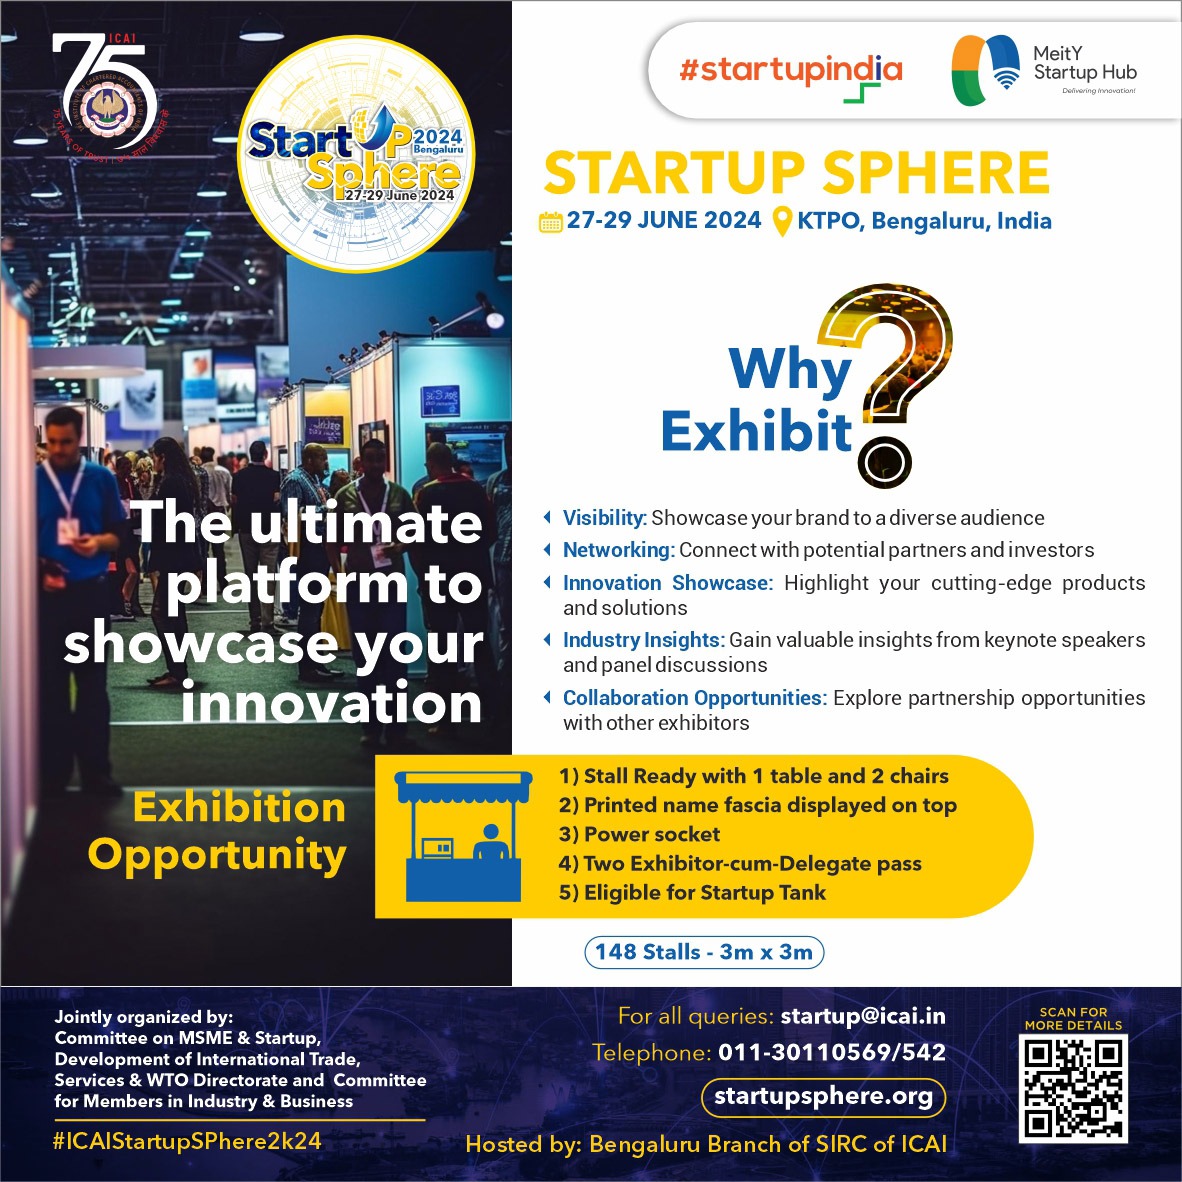 ICAI Startup Exhibition Opportunities As an Exhibitor, you have the opportunity to be a part of this dynamic event and enjoy a multitude of benefits. Charges Starting just from INR 1,00,000* To reserve your exhibition space at Startup Sphere 2024, Visit shorturl.at/irtT5